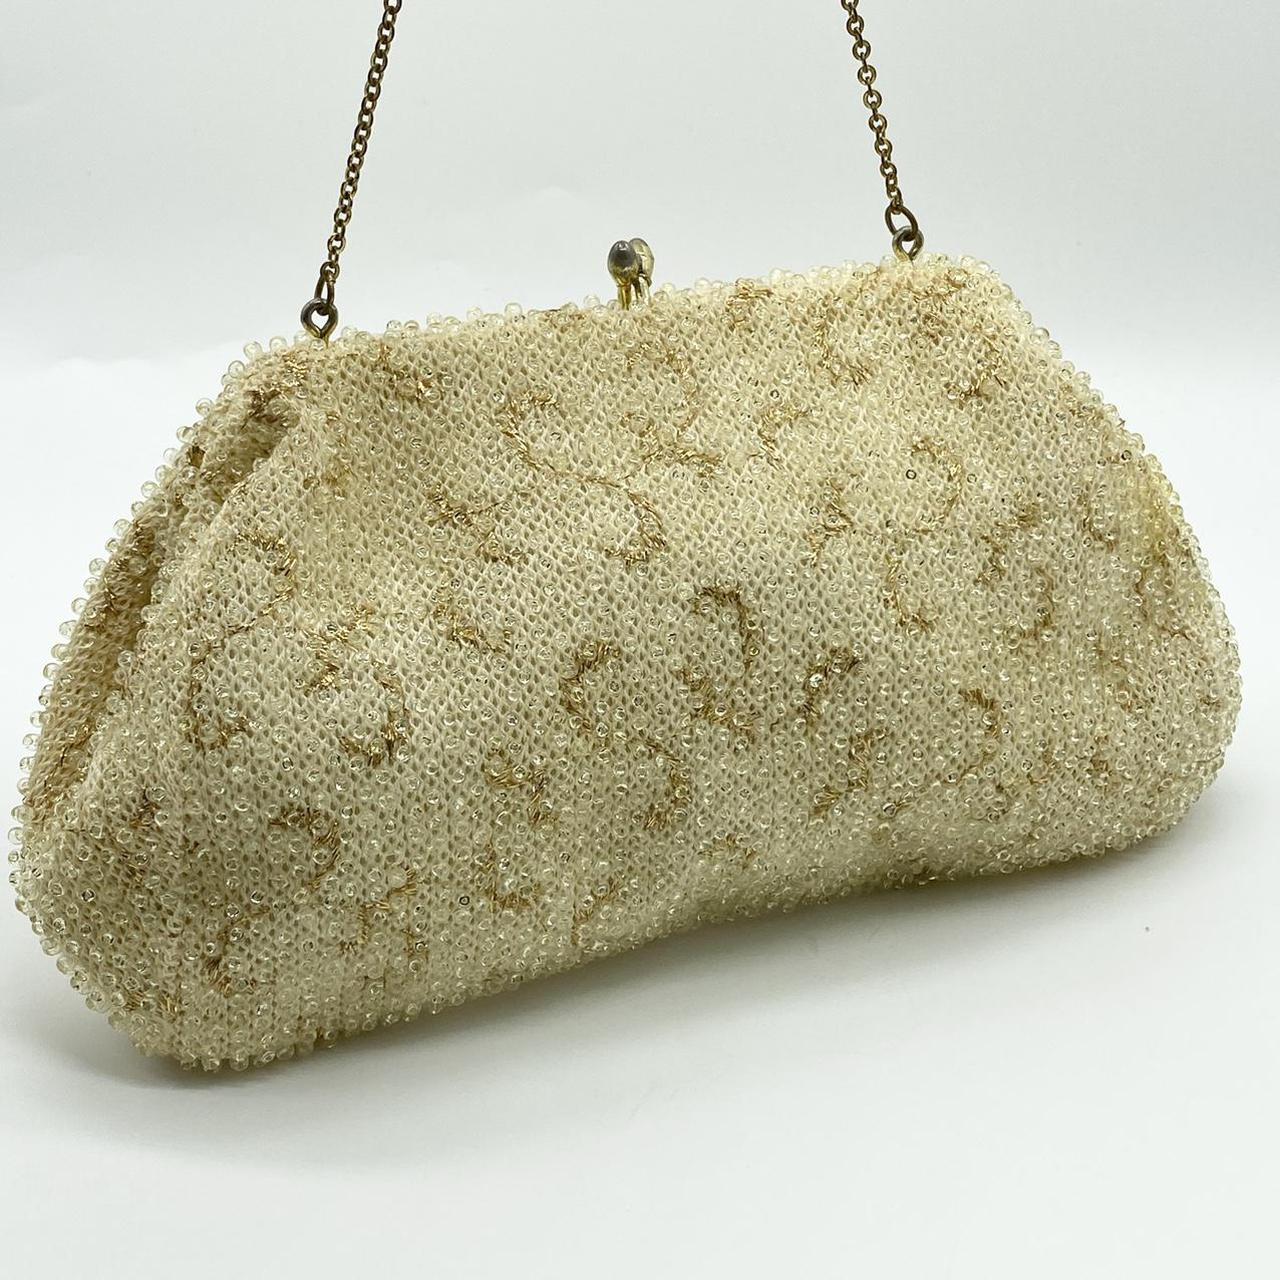 Product Image 2 - Absolutely beautiful beaded bag from